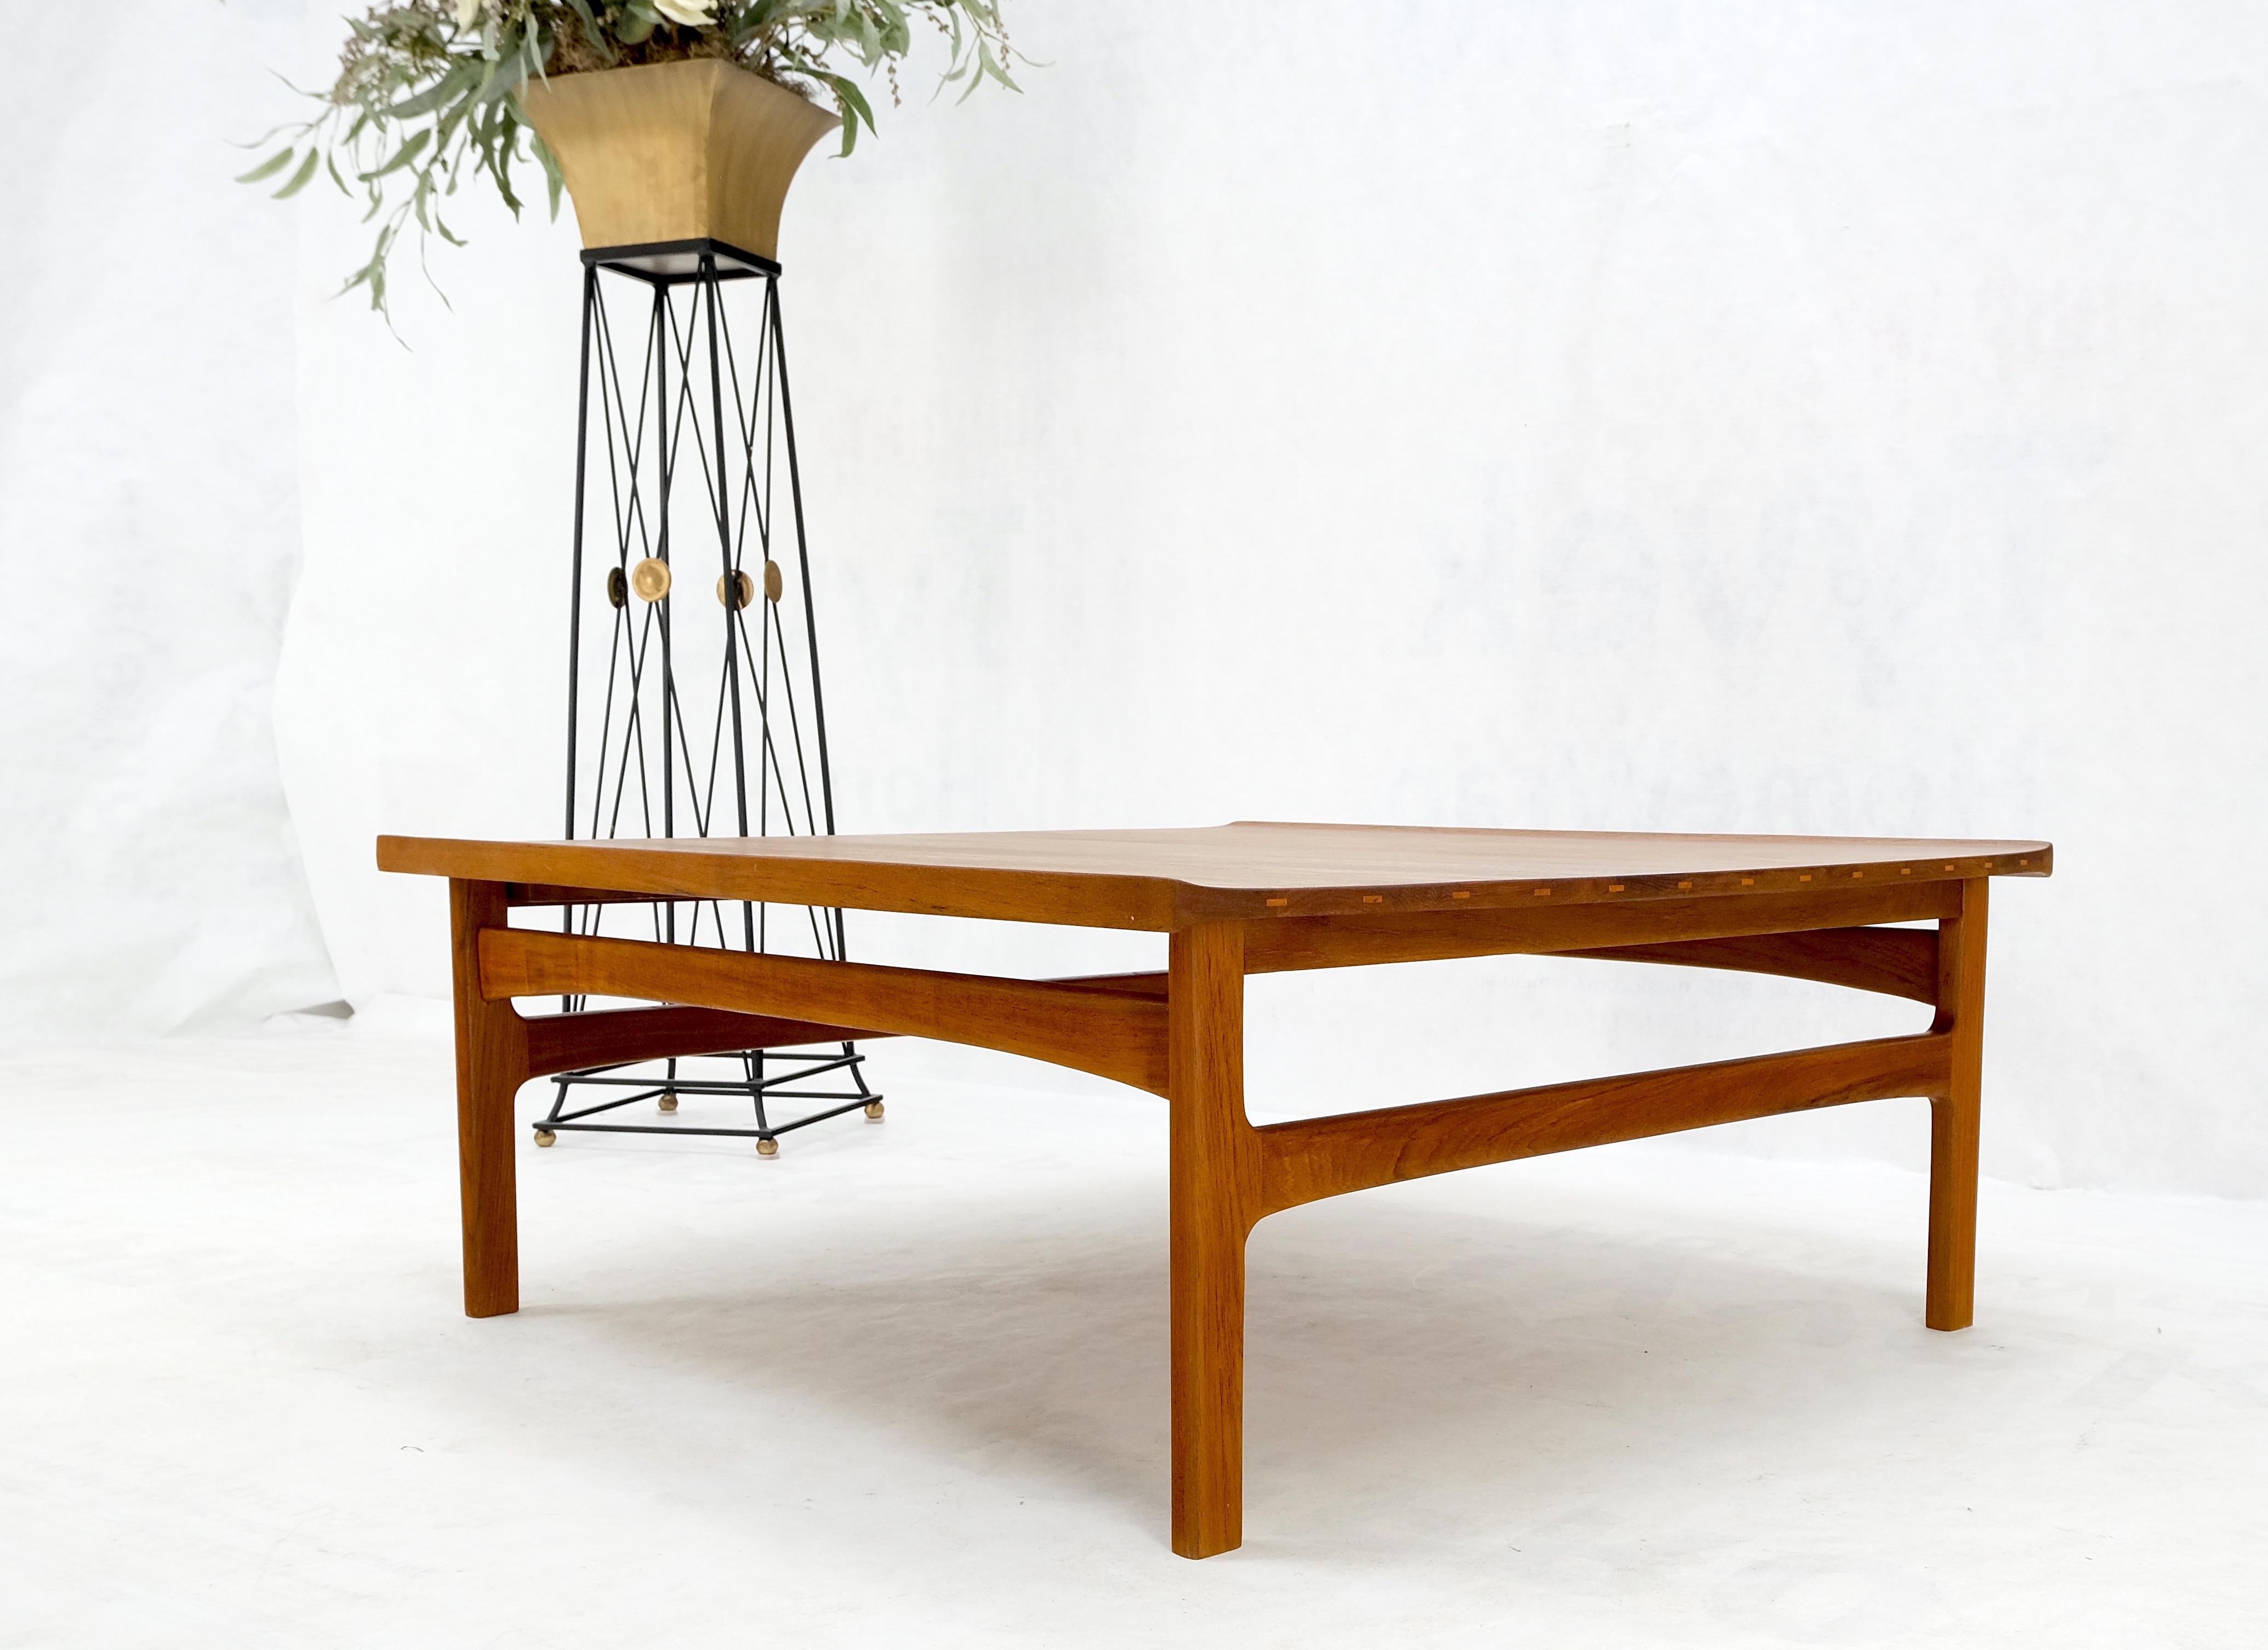 20th Century Rolled Edge Solid Teak Top Square Danish Mid-Century Modern Coffee Table Mint! For Sale